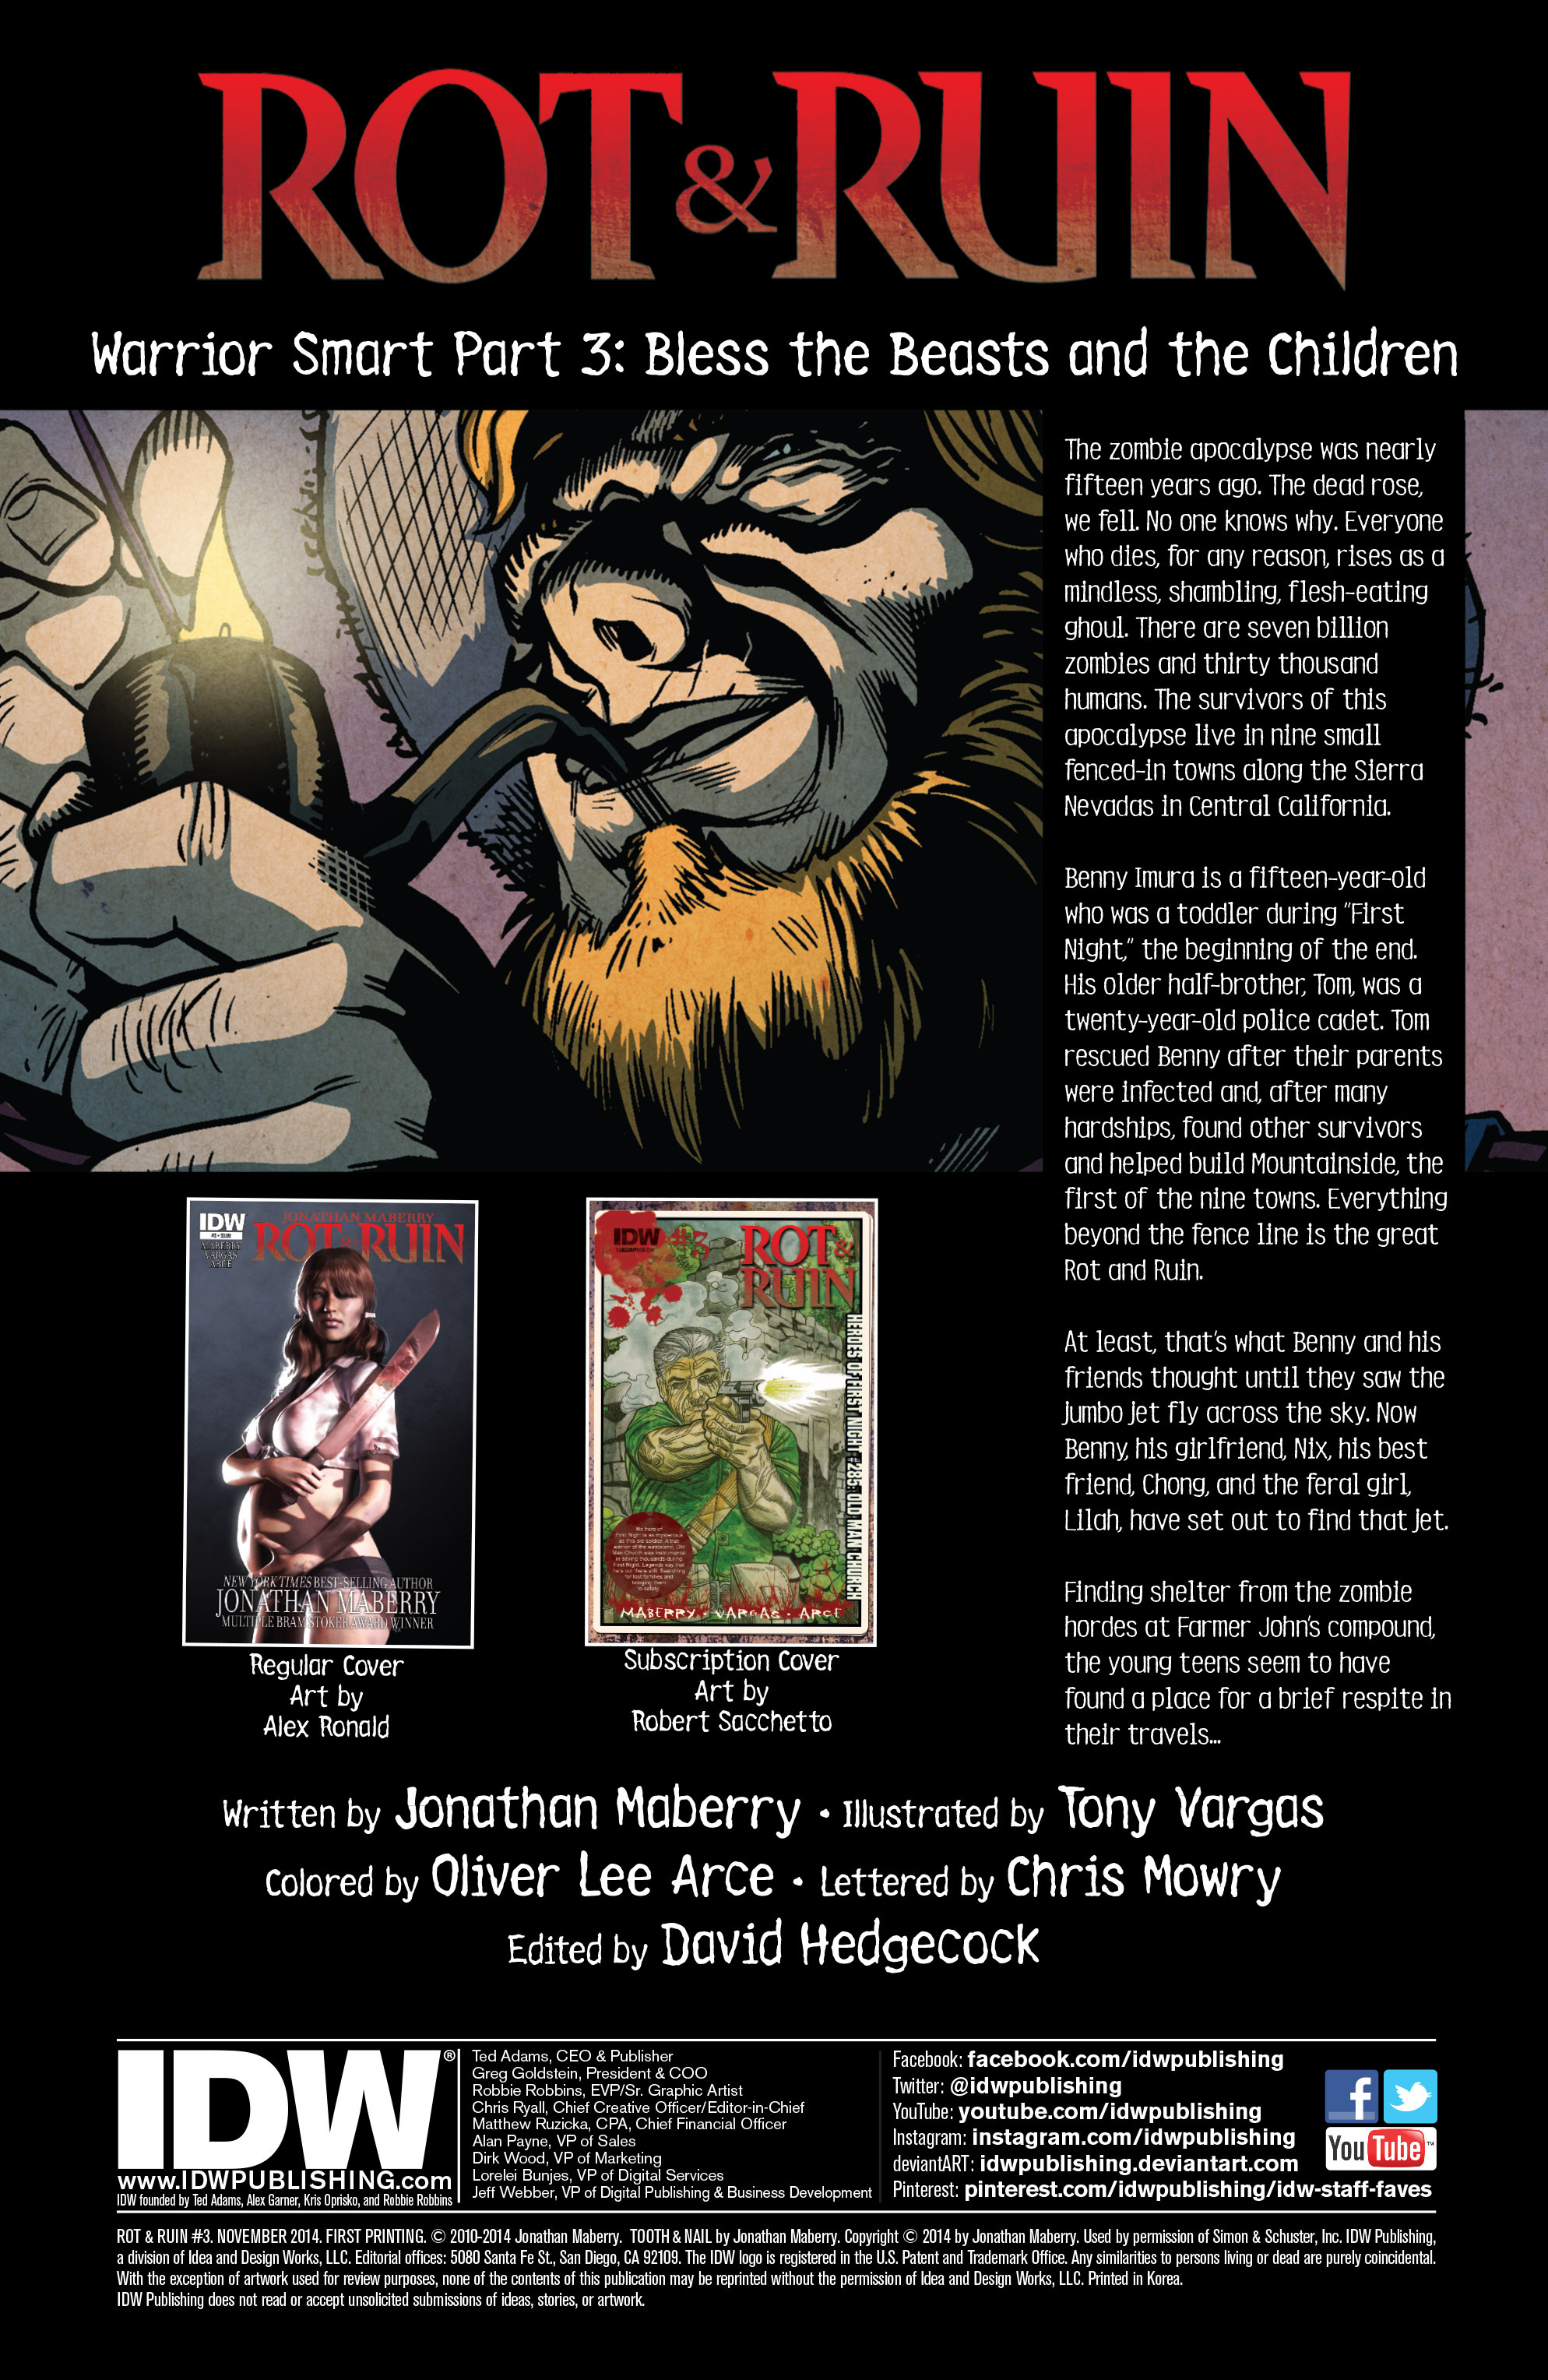 Read online Rot & Ruin comic -  Issue #3 - 2